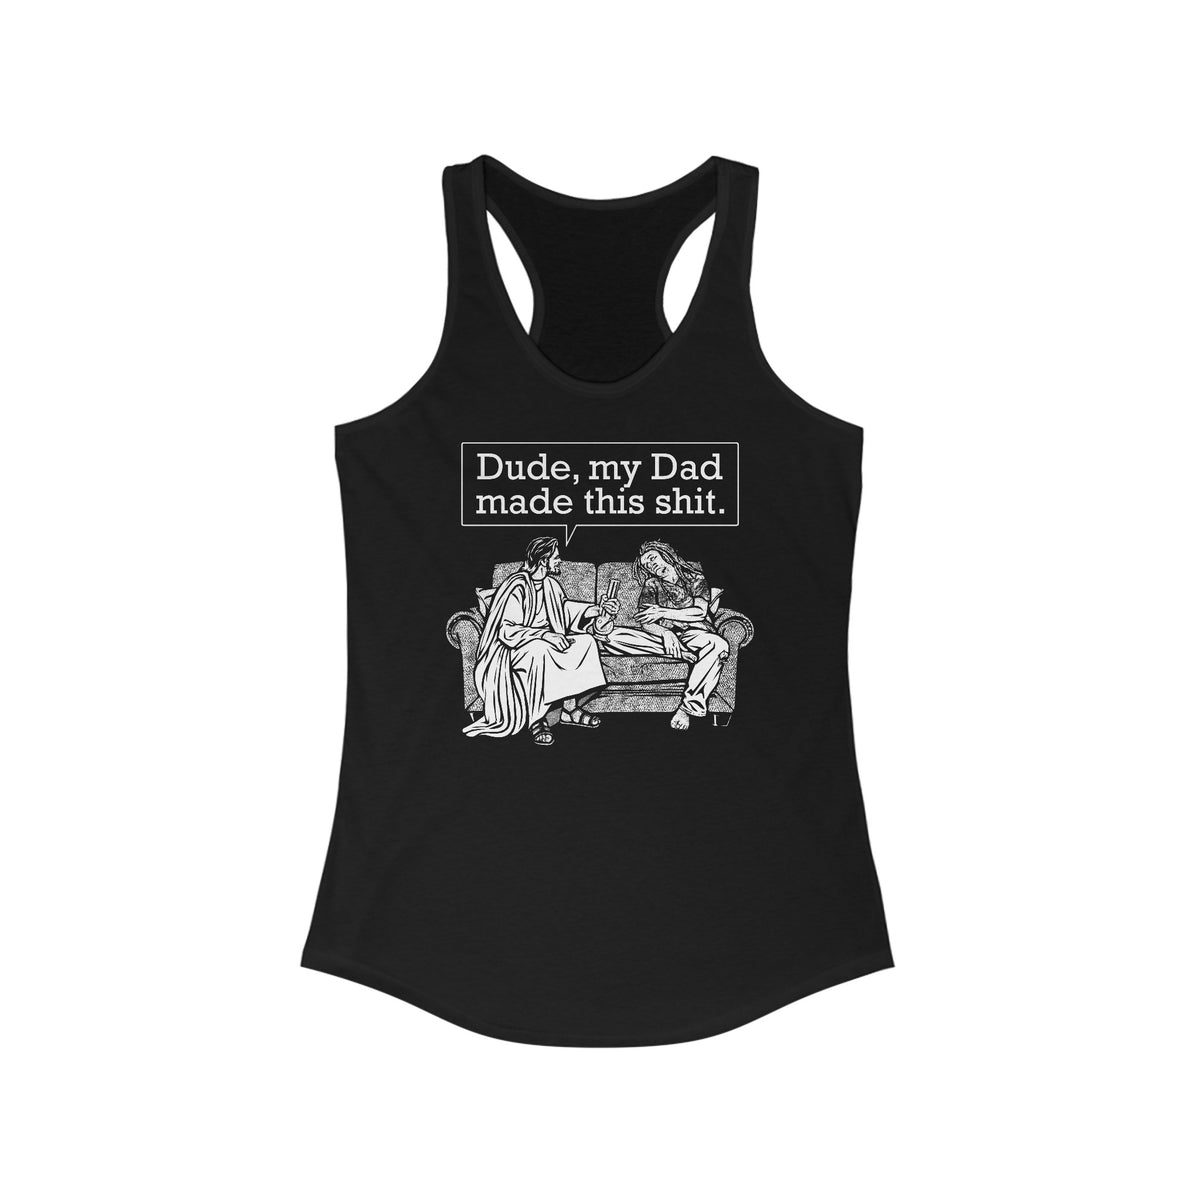 Dude My Dad Made This Shit - Women’s Racerback Tank